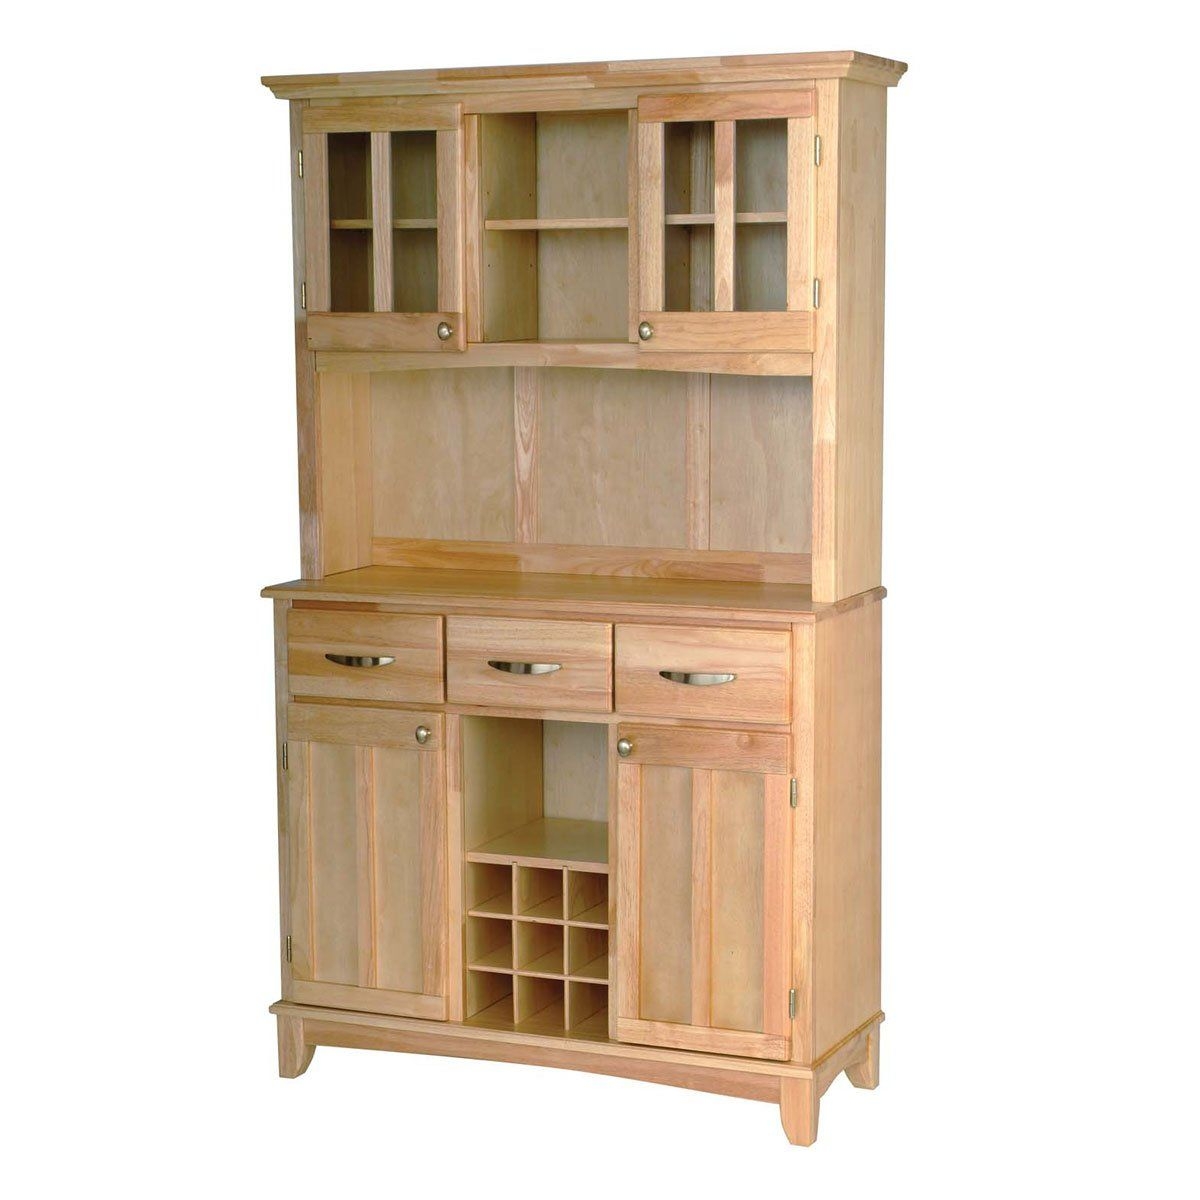 Large wood bakers rack with two door hutch